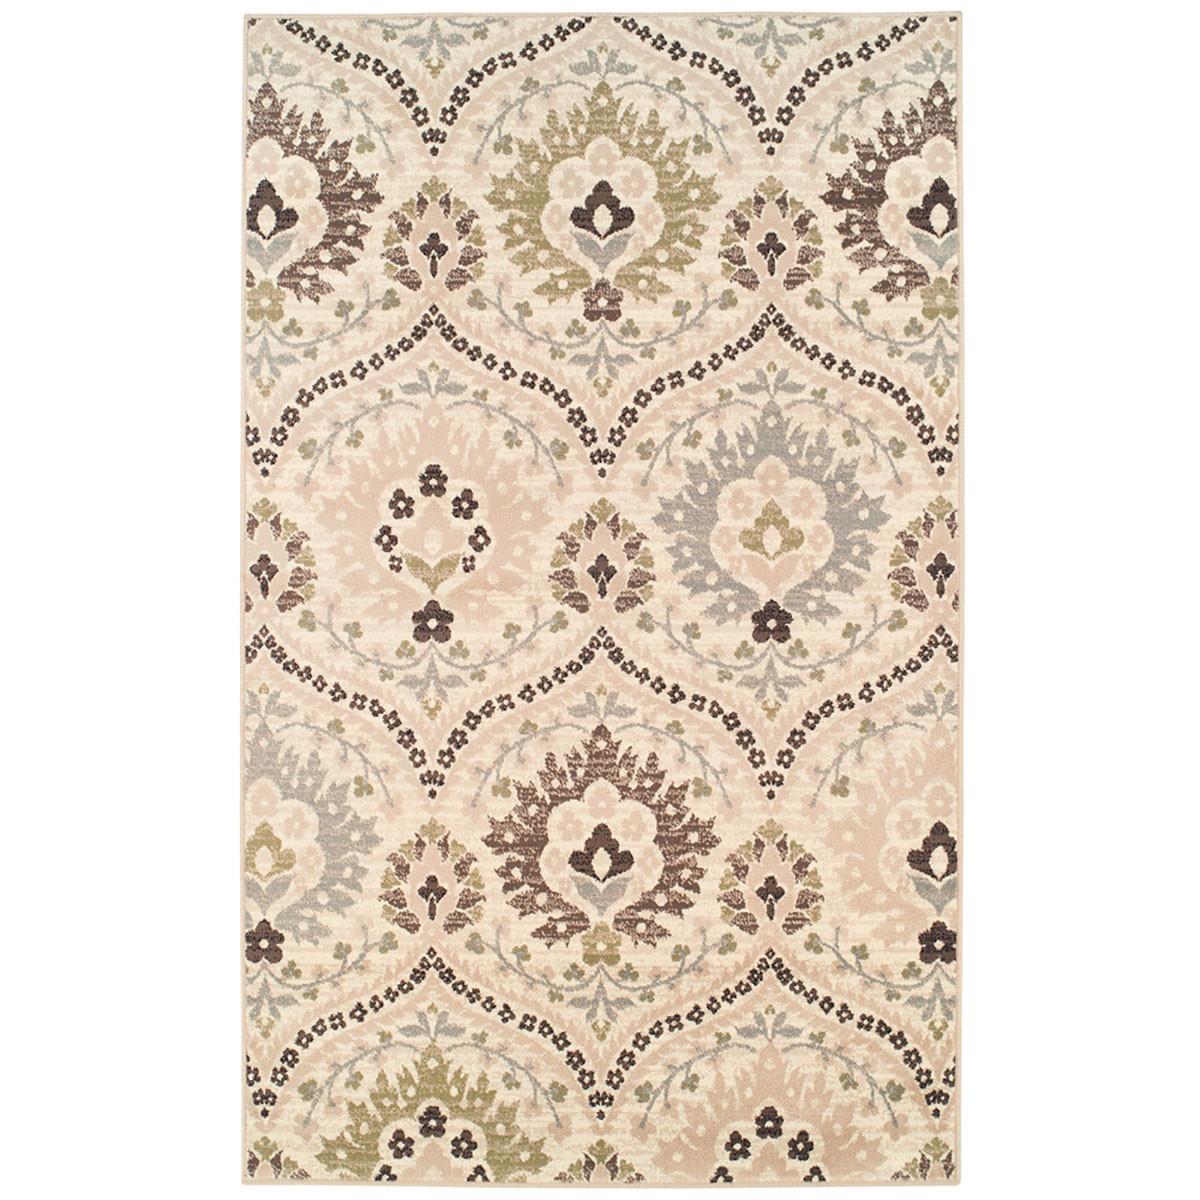 8' X 10' Ivory Gray And Olive Floral Stain Resistant Area Rug Default Title